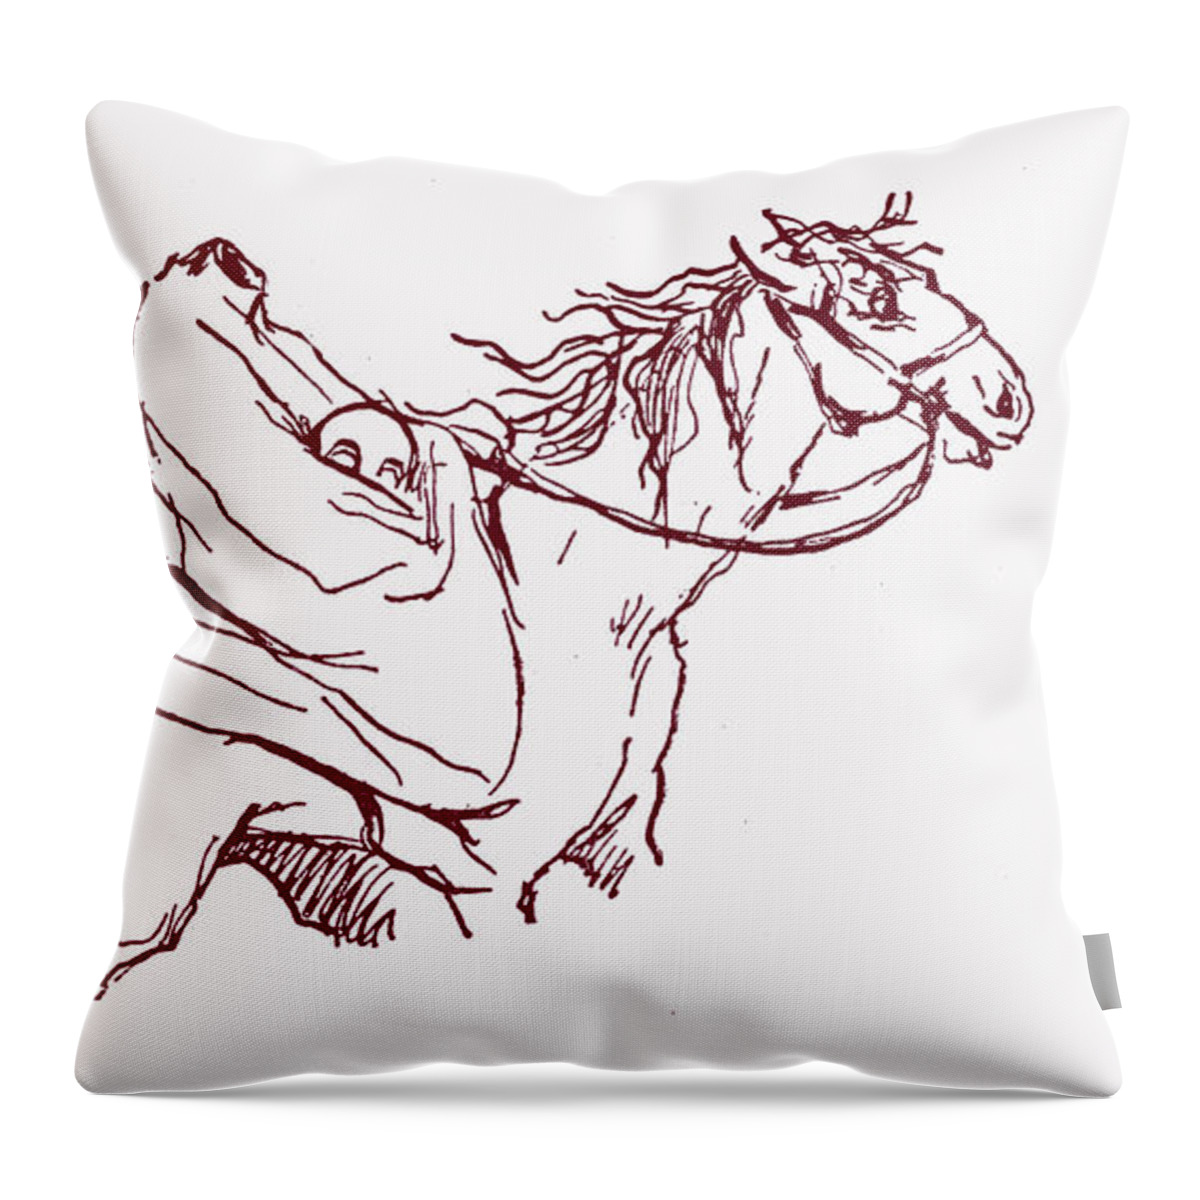 The Legend Throw Pillow featuring the painting A Scene From The Legend Of Sleepy Hollow by Frances Brundage